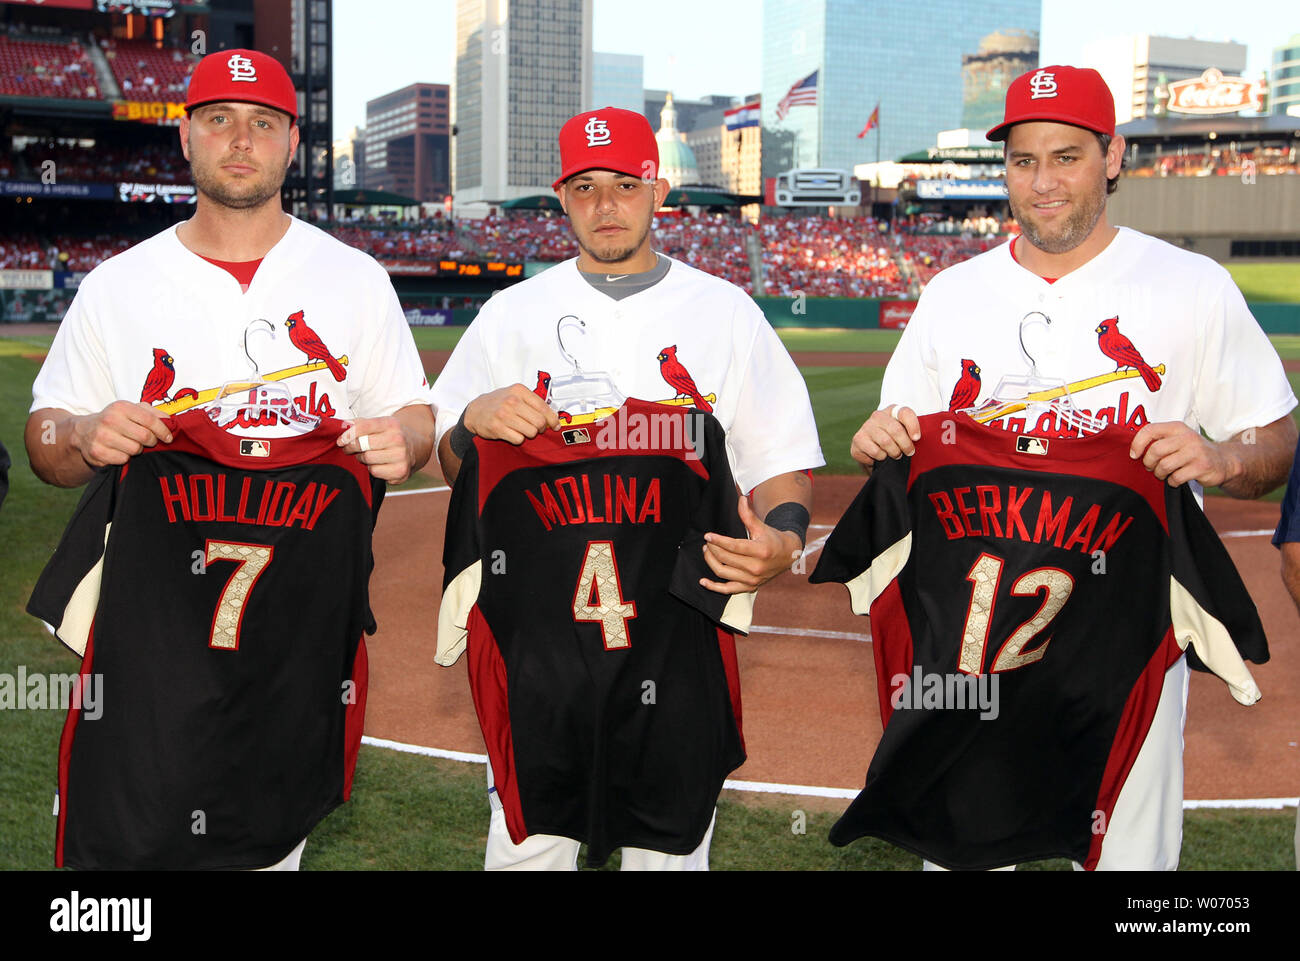 St. Louis Cardinals (L to R) Matt Holliday, Yadier Molina and Lance Berkman  showoff their National League All-Star Jerseys before a game against the  Arizona Diamondbacks at Busch Stadium in St. Louis